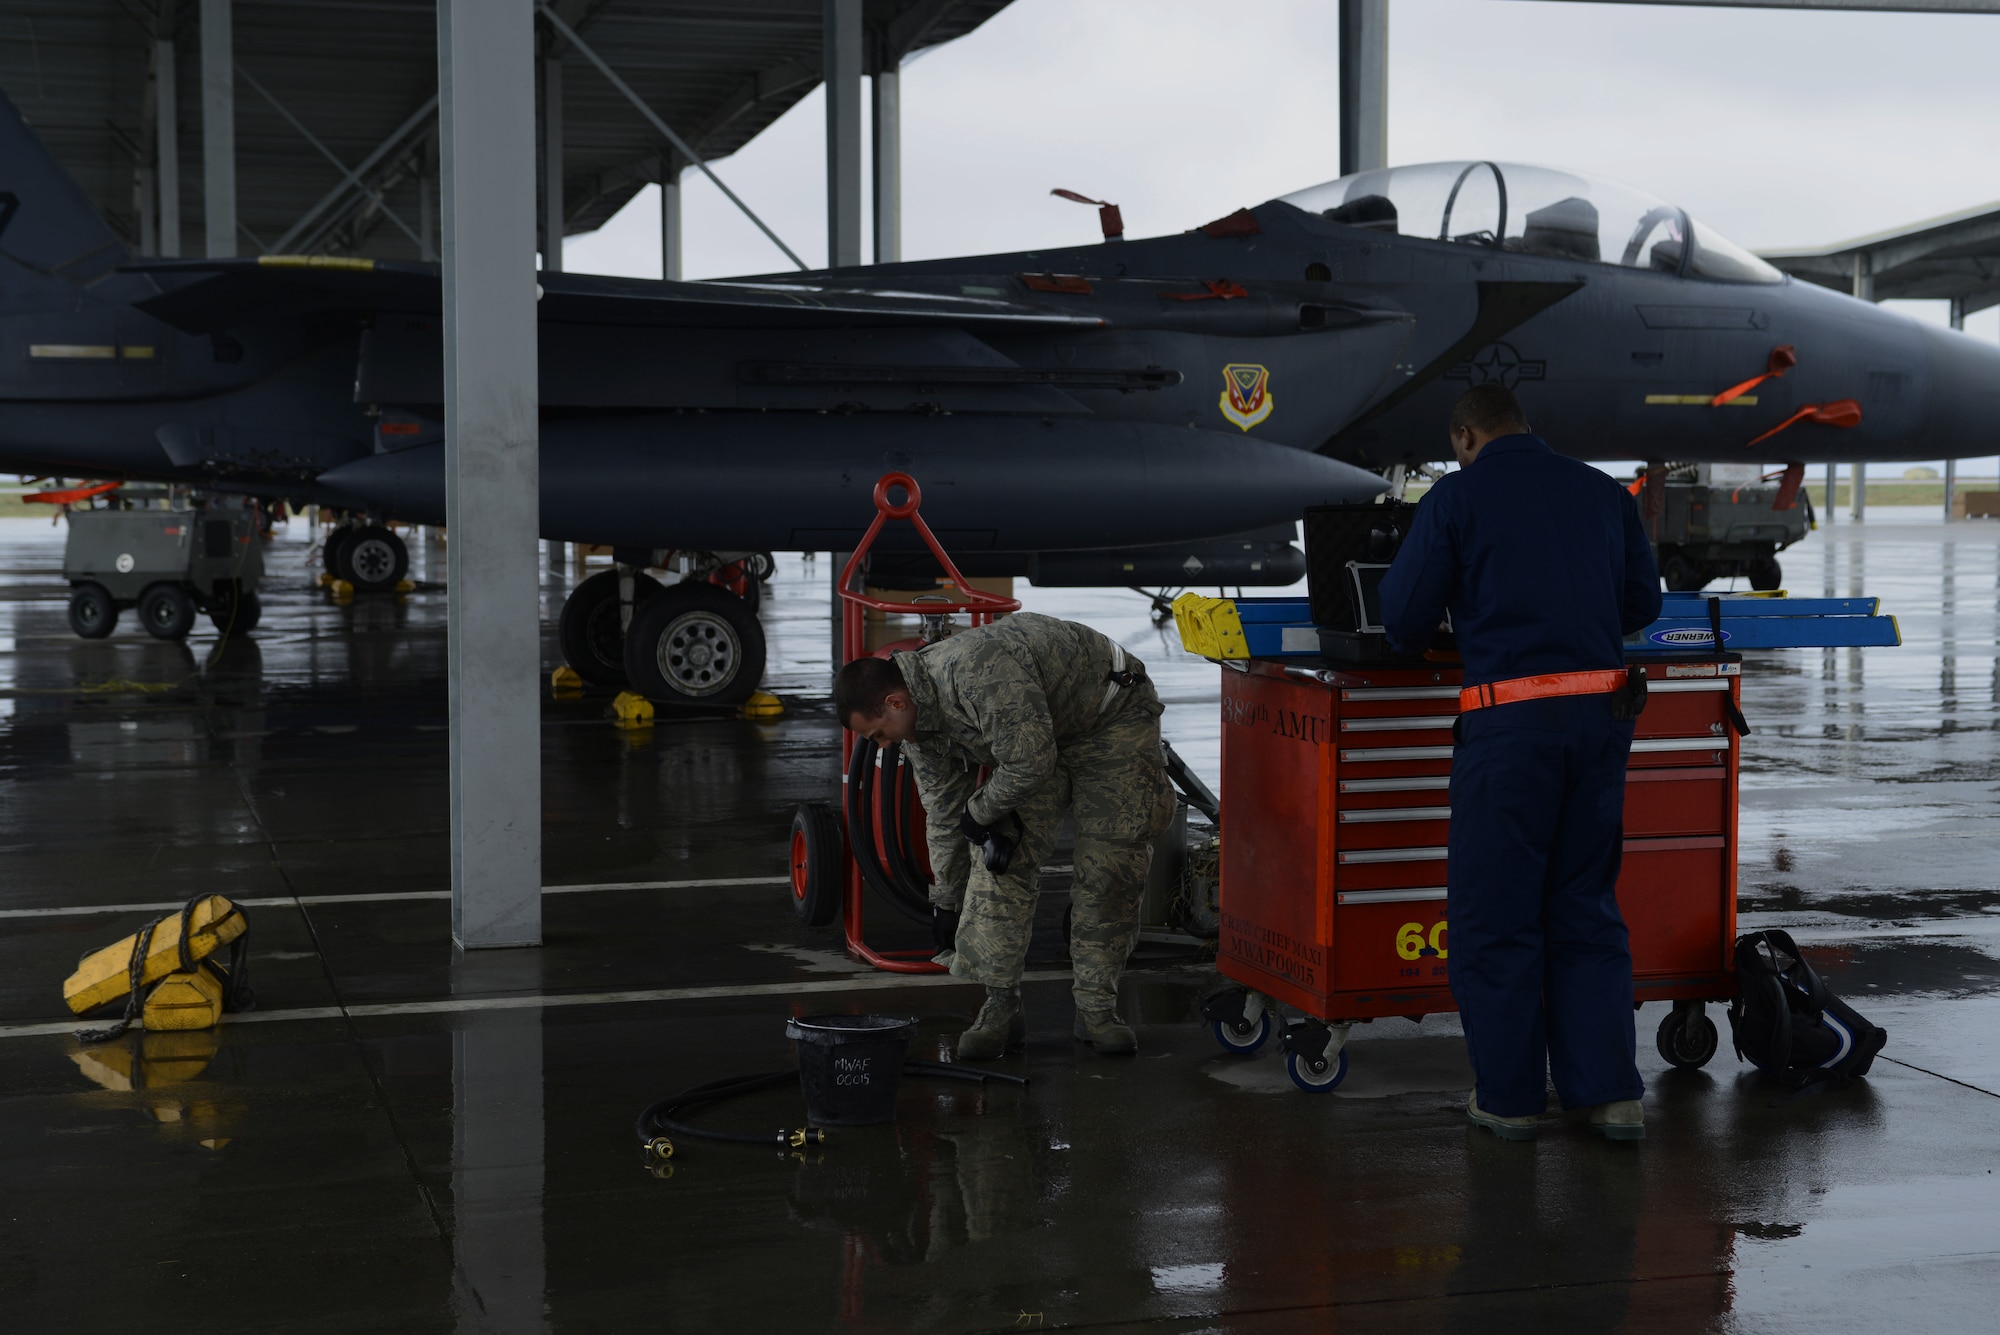 From left, Senior Airman Ben Failer, 366th Aircraft Maintenance Squadron aircraft armament systems technician, and Staff Sgt. Michael Gates, 366th AMXS crew chief, prepare for an aircraft to arrive March 10, 2014, at Mountain Home Air Force Base, Idaho. Members of the 389th Aircraft Maintenance Unit are currently participating in the Gunfighter Flag exercise. Operations out of MHAFB will be increased throughout the week of March 10-14. Gunfighter Flag is an excellent opportunity for ground crew members to train and respond to multiple daily launches. (U.S. Air Force photo by Senior Airman Ben Sutton/Released)


